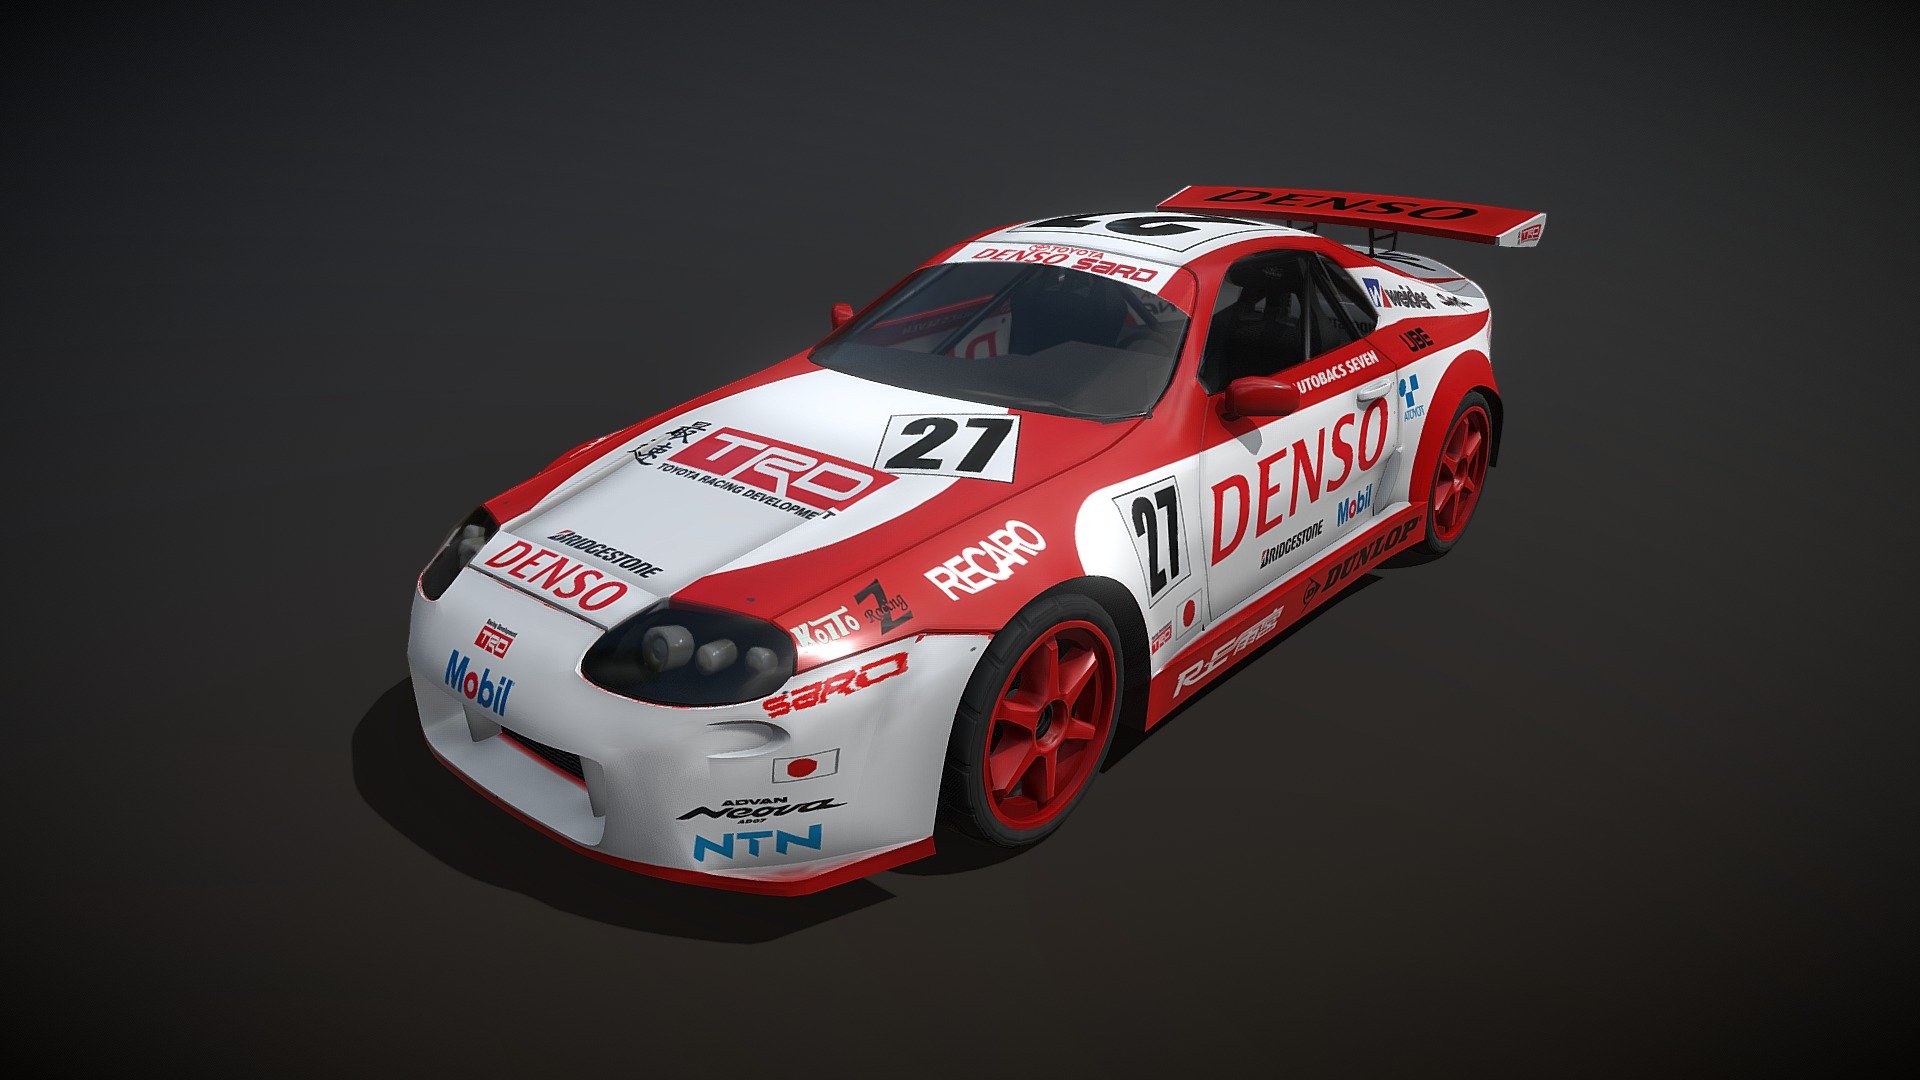 Toyota Denso Sard Supra
Console Specification Racing Car
Made for University Assignment - Toyota Denso Sard Supra - 3D model by SheldonJ99 3d model